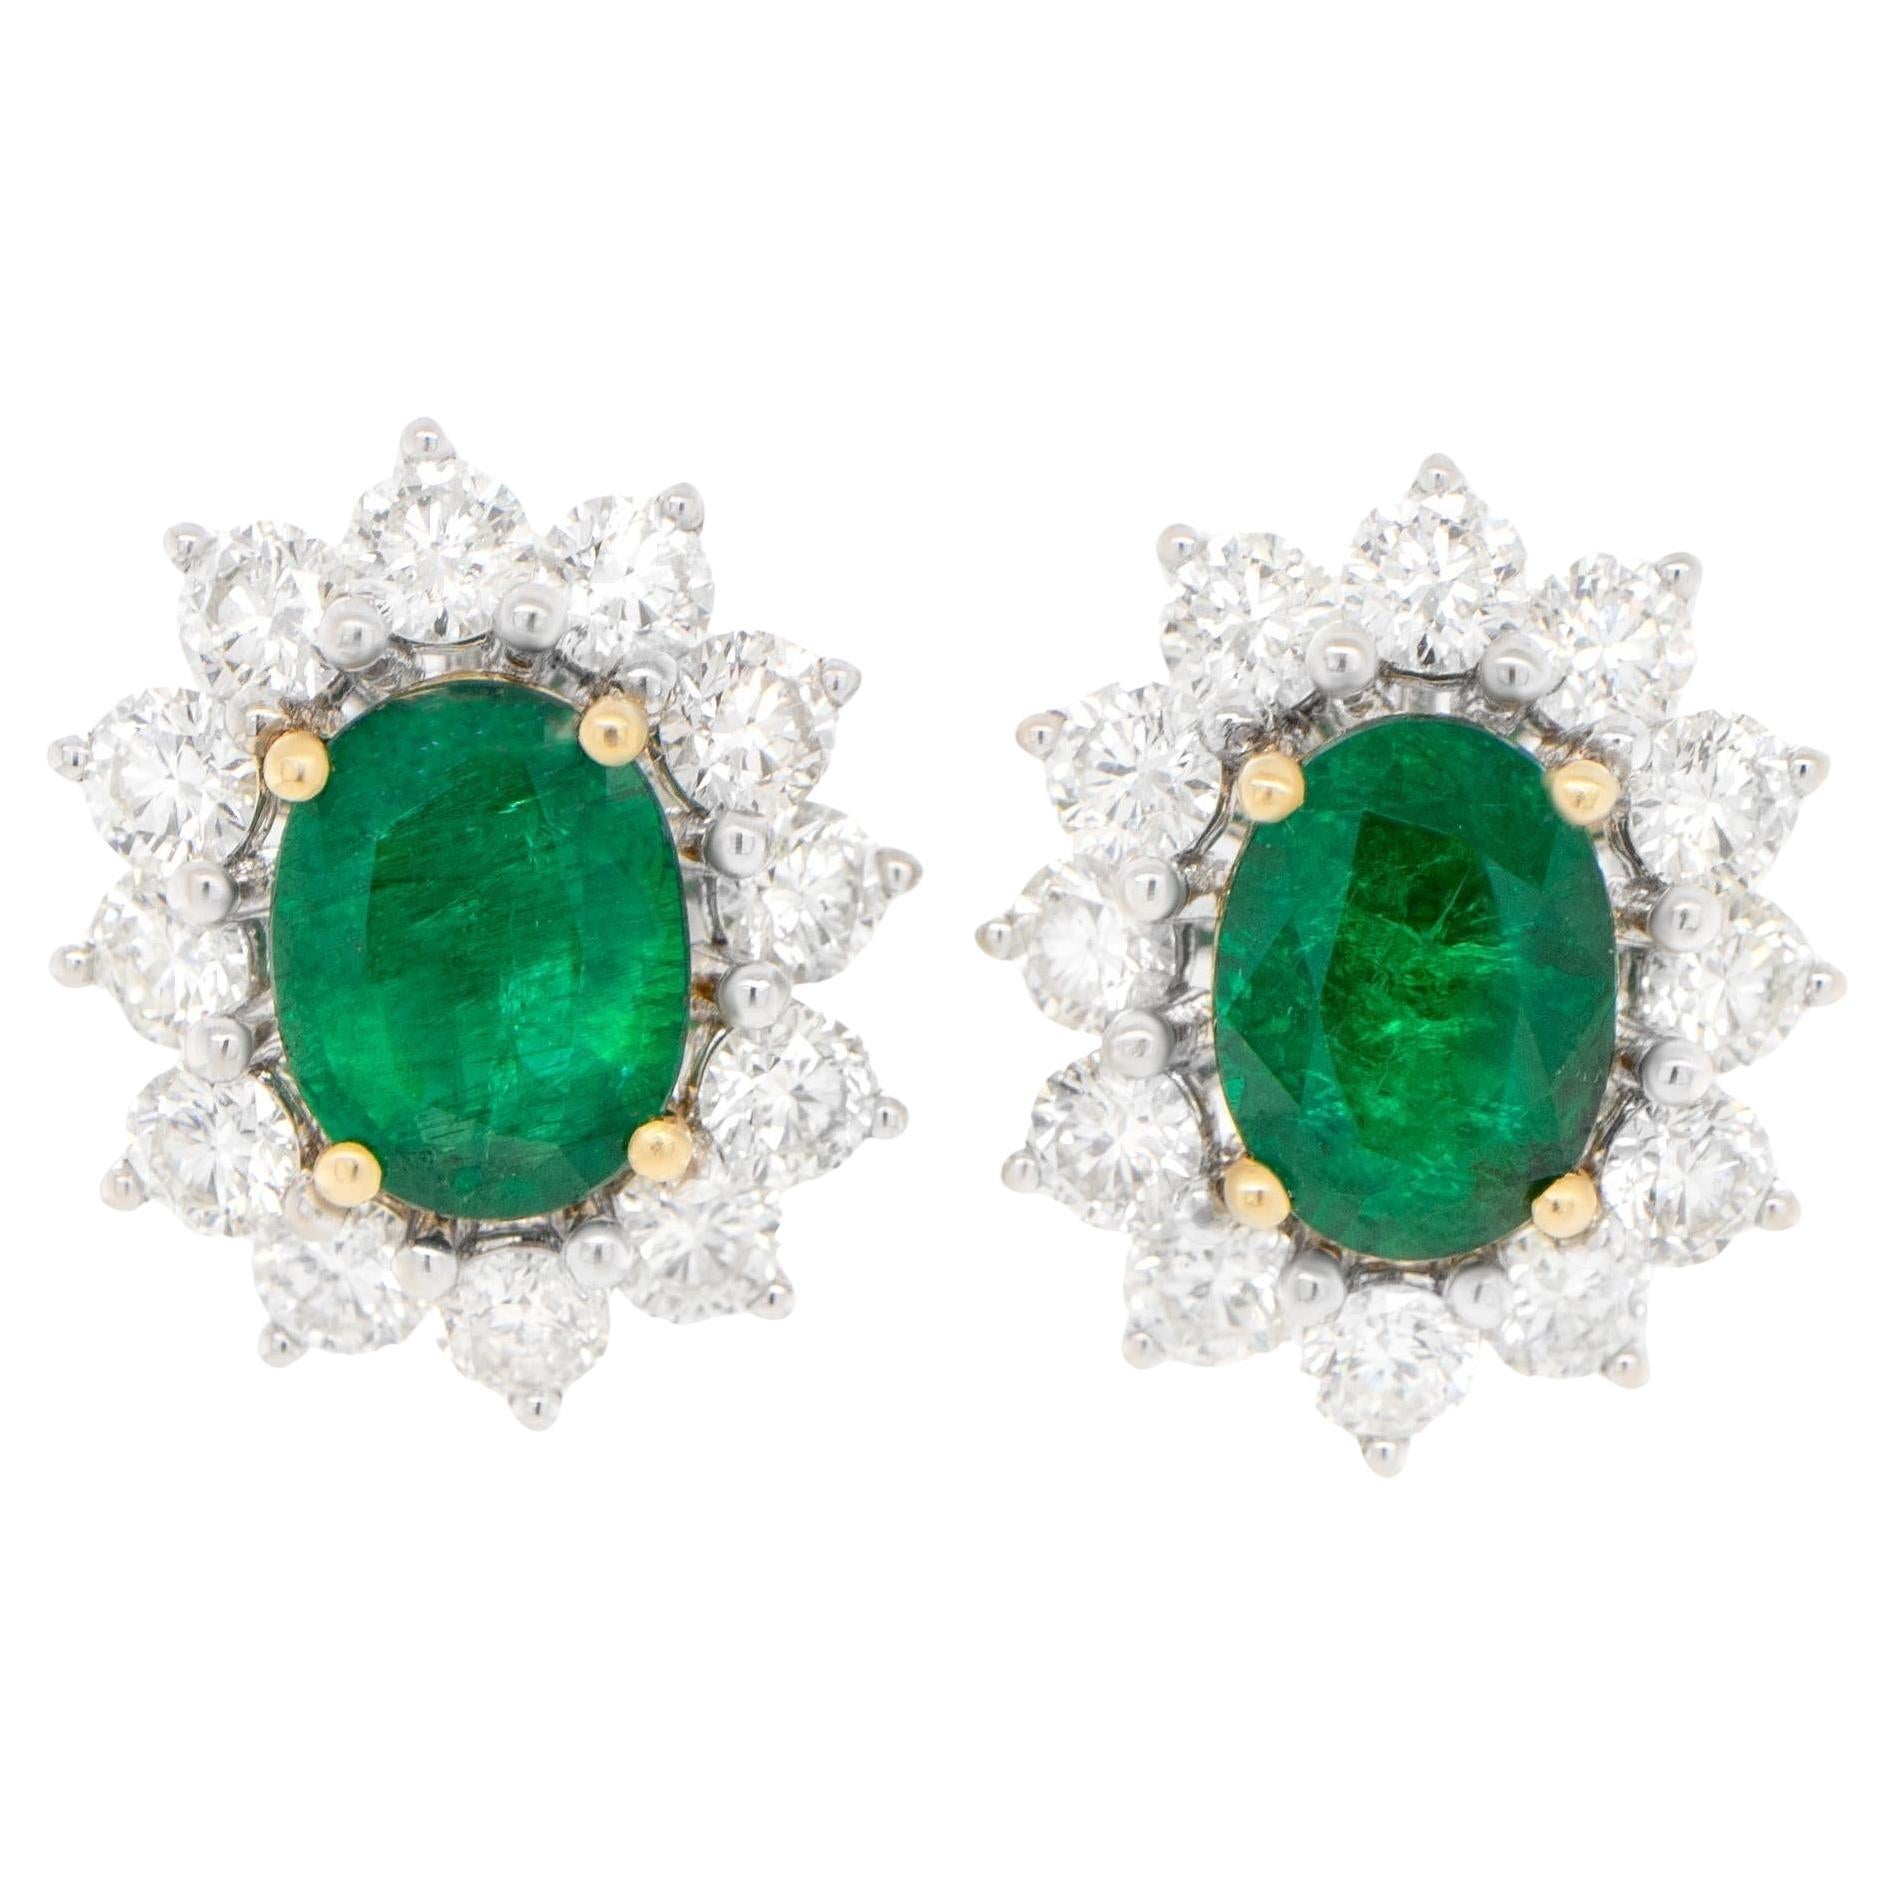 Emerald Stud Earrings Large Diamond Halo 7.42 Carats 18K Gold For Sale